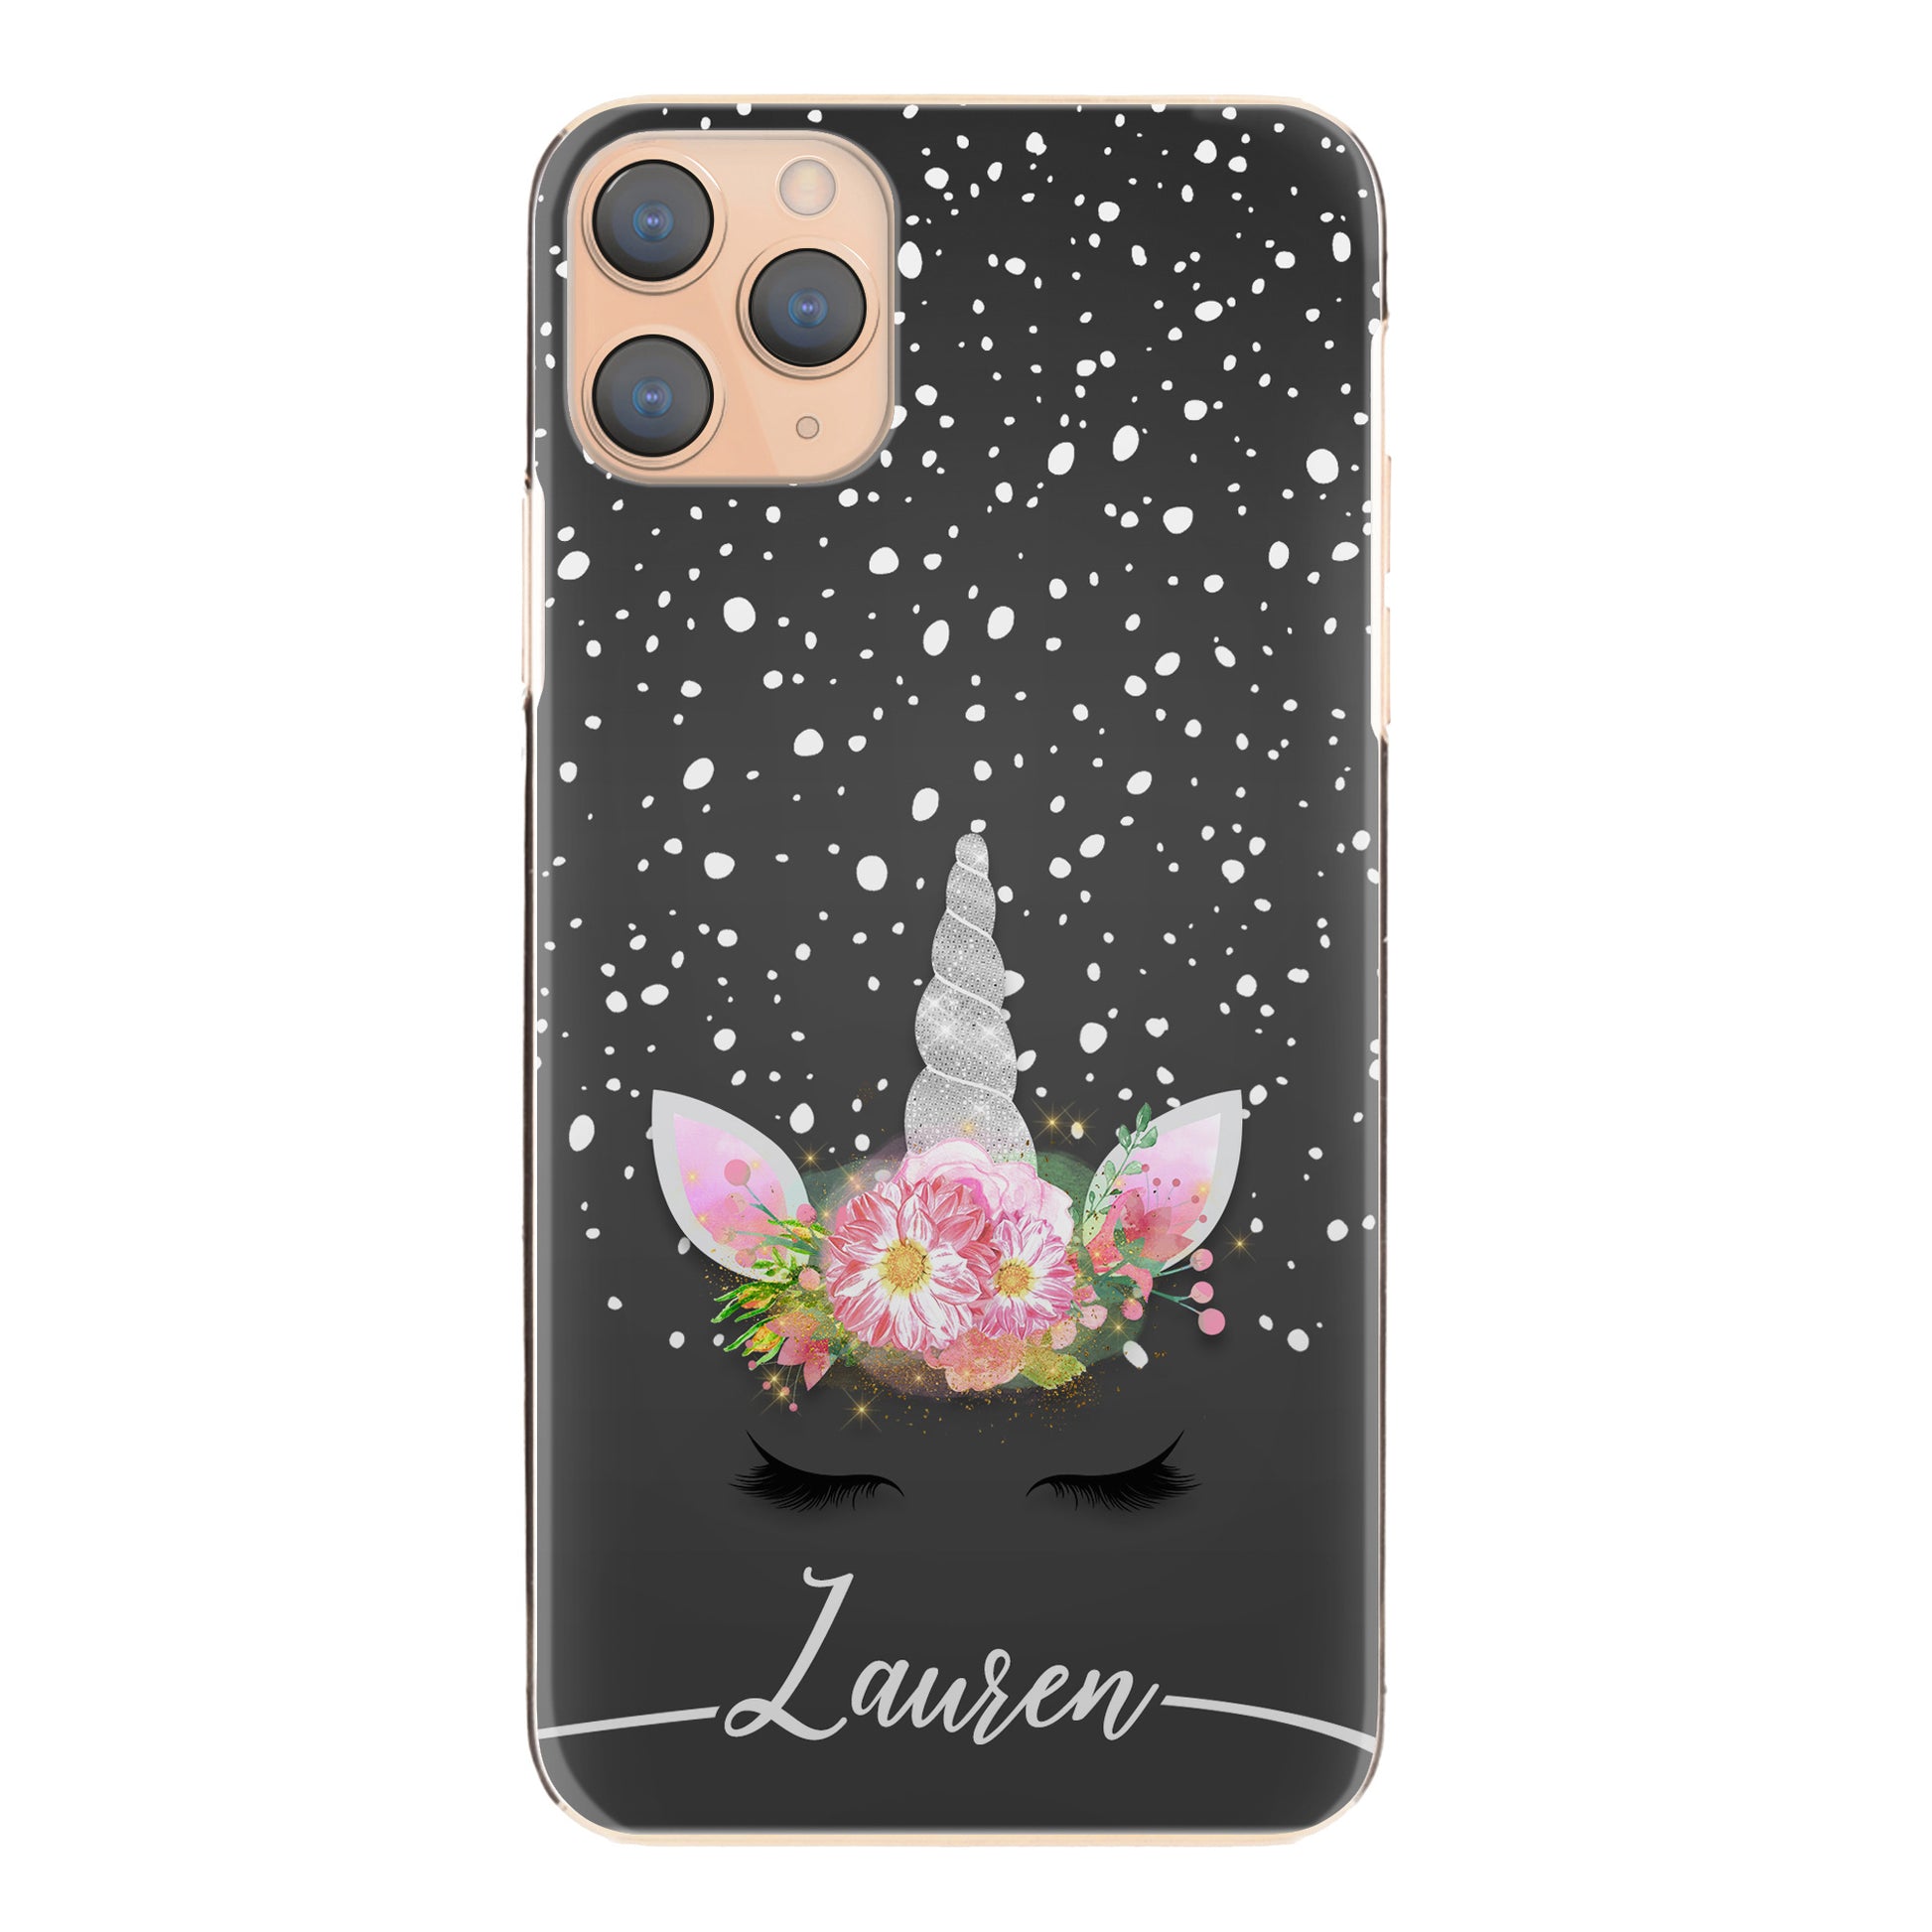 Personalised HTC Phone Hard Case with Silver Floral Unicorn and Text on Dark Grey